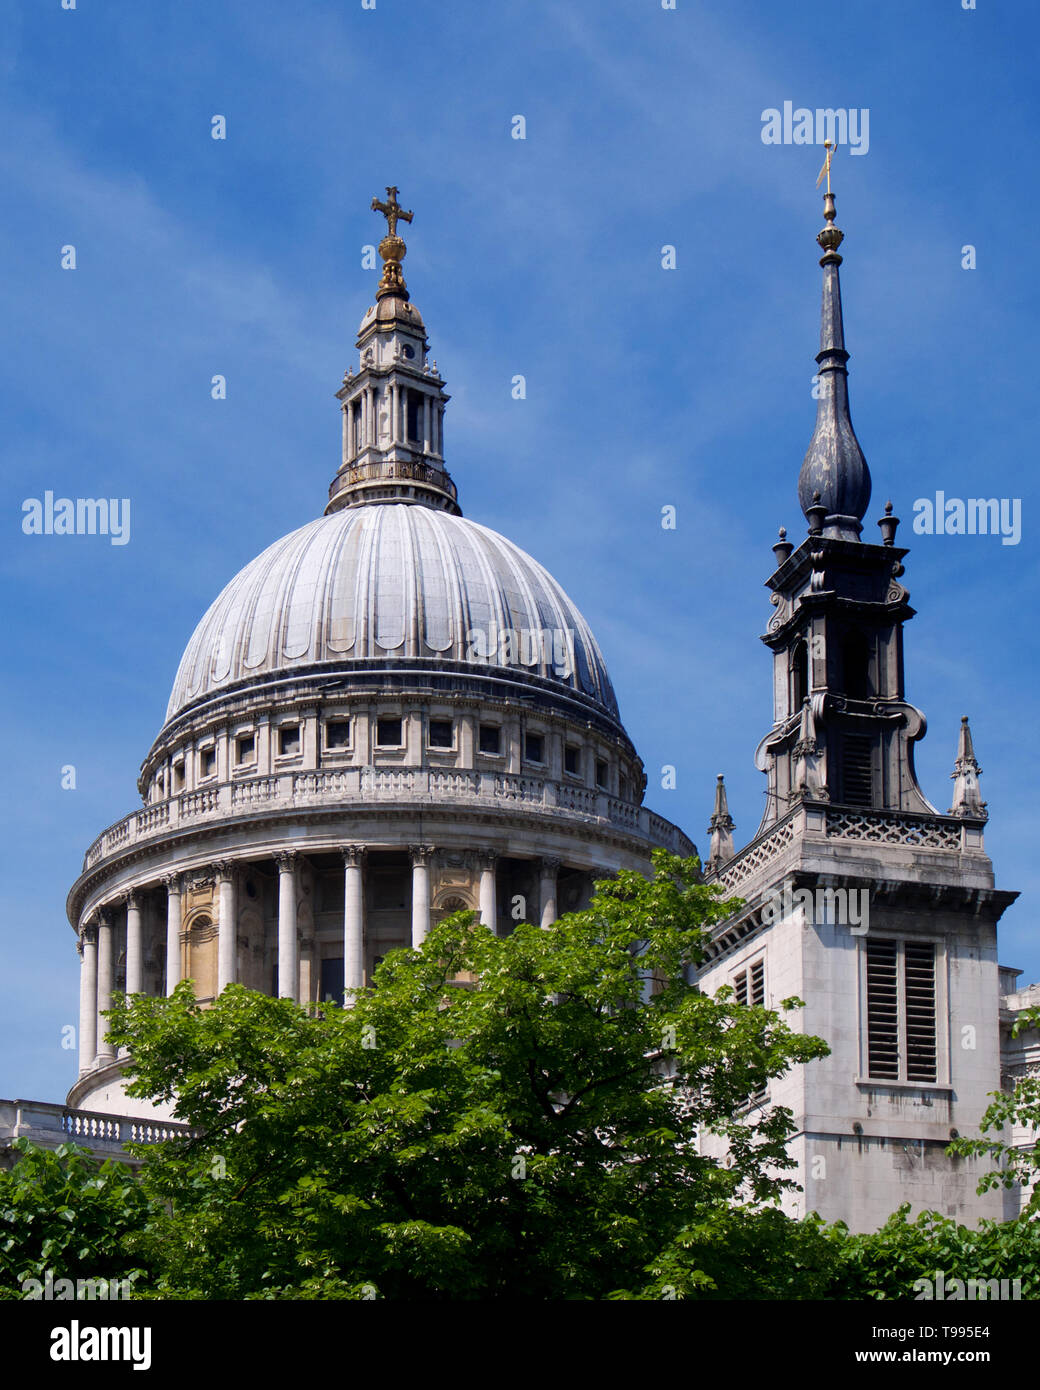 The dome of St. Paul's Cathedral, London Stock Photo